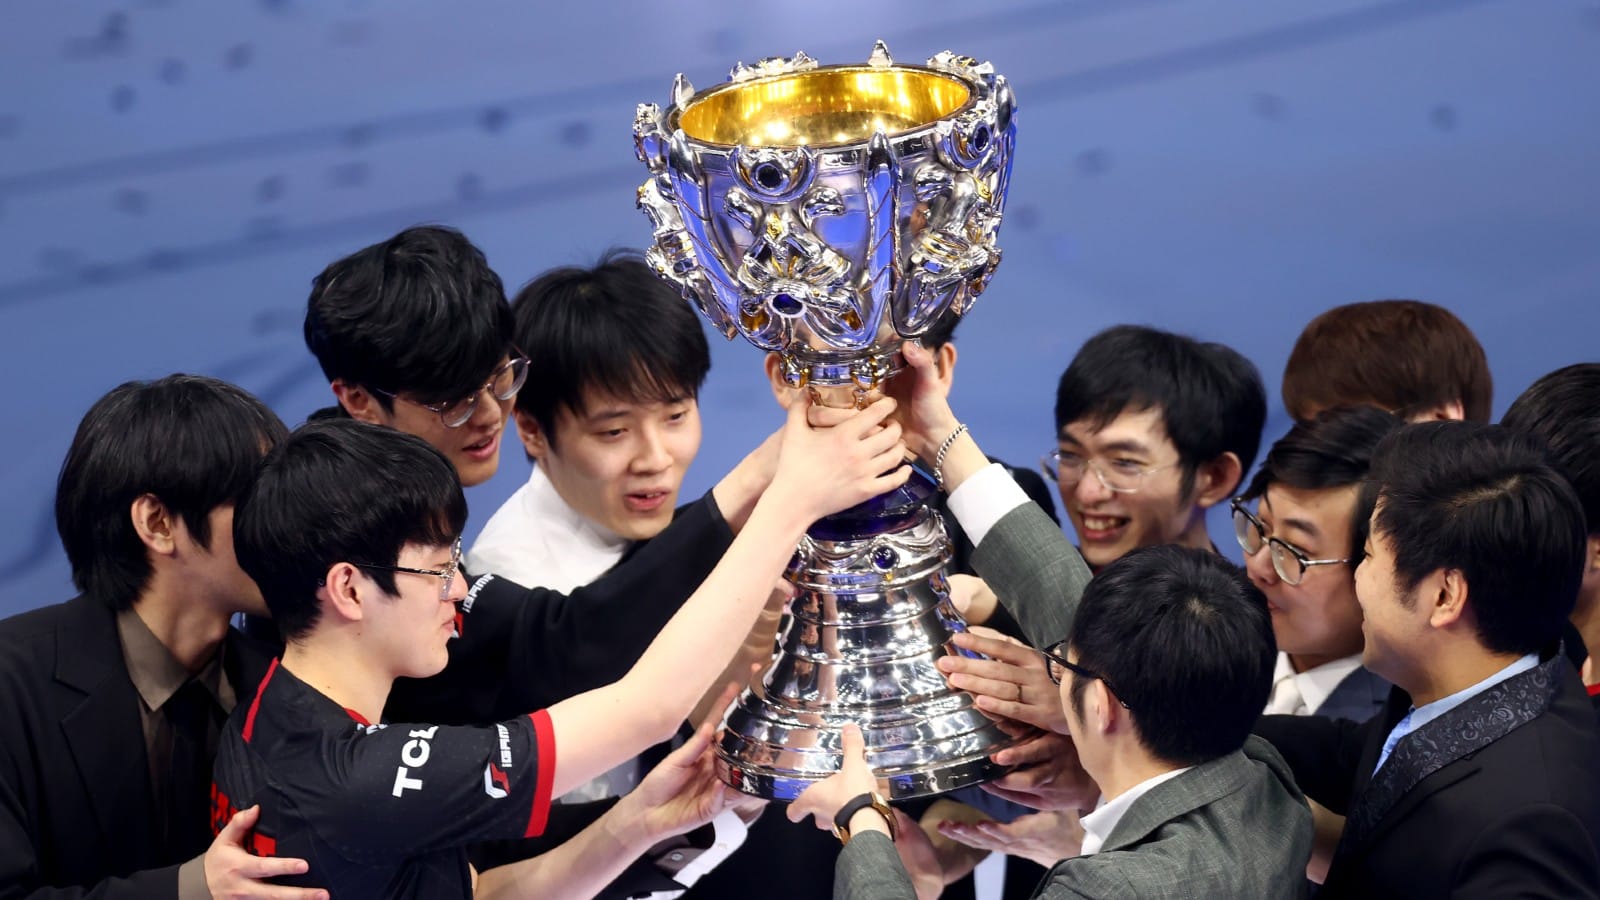 League of Legends Worlds 2021: Edward Gaming win title